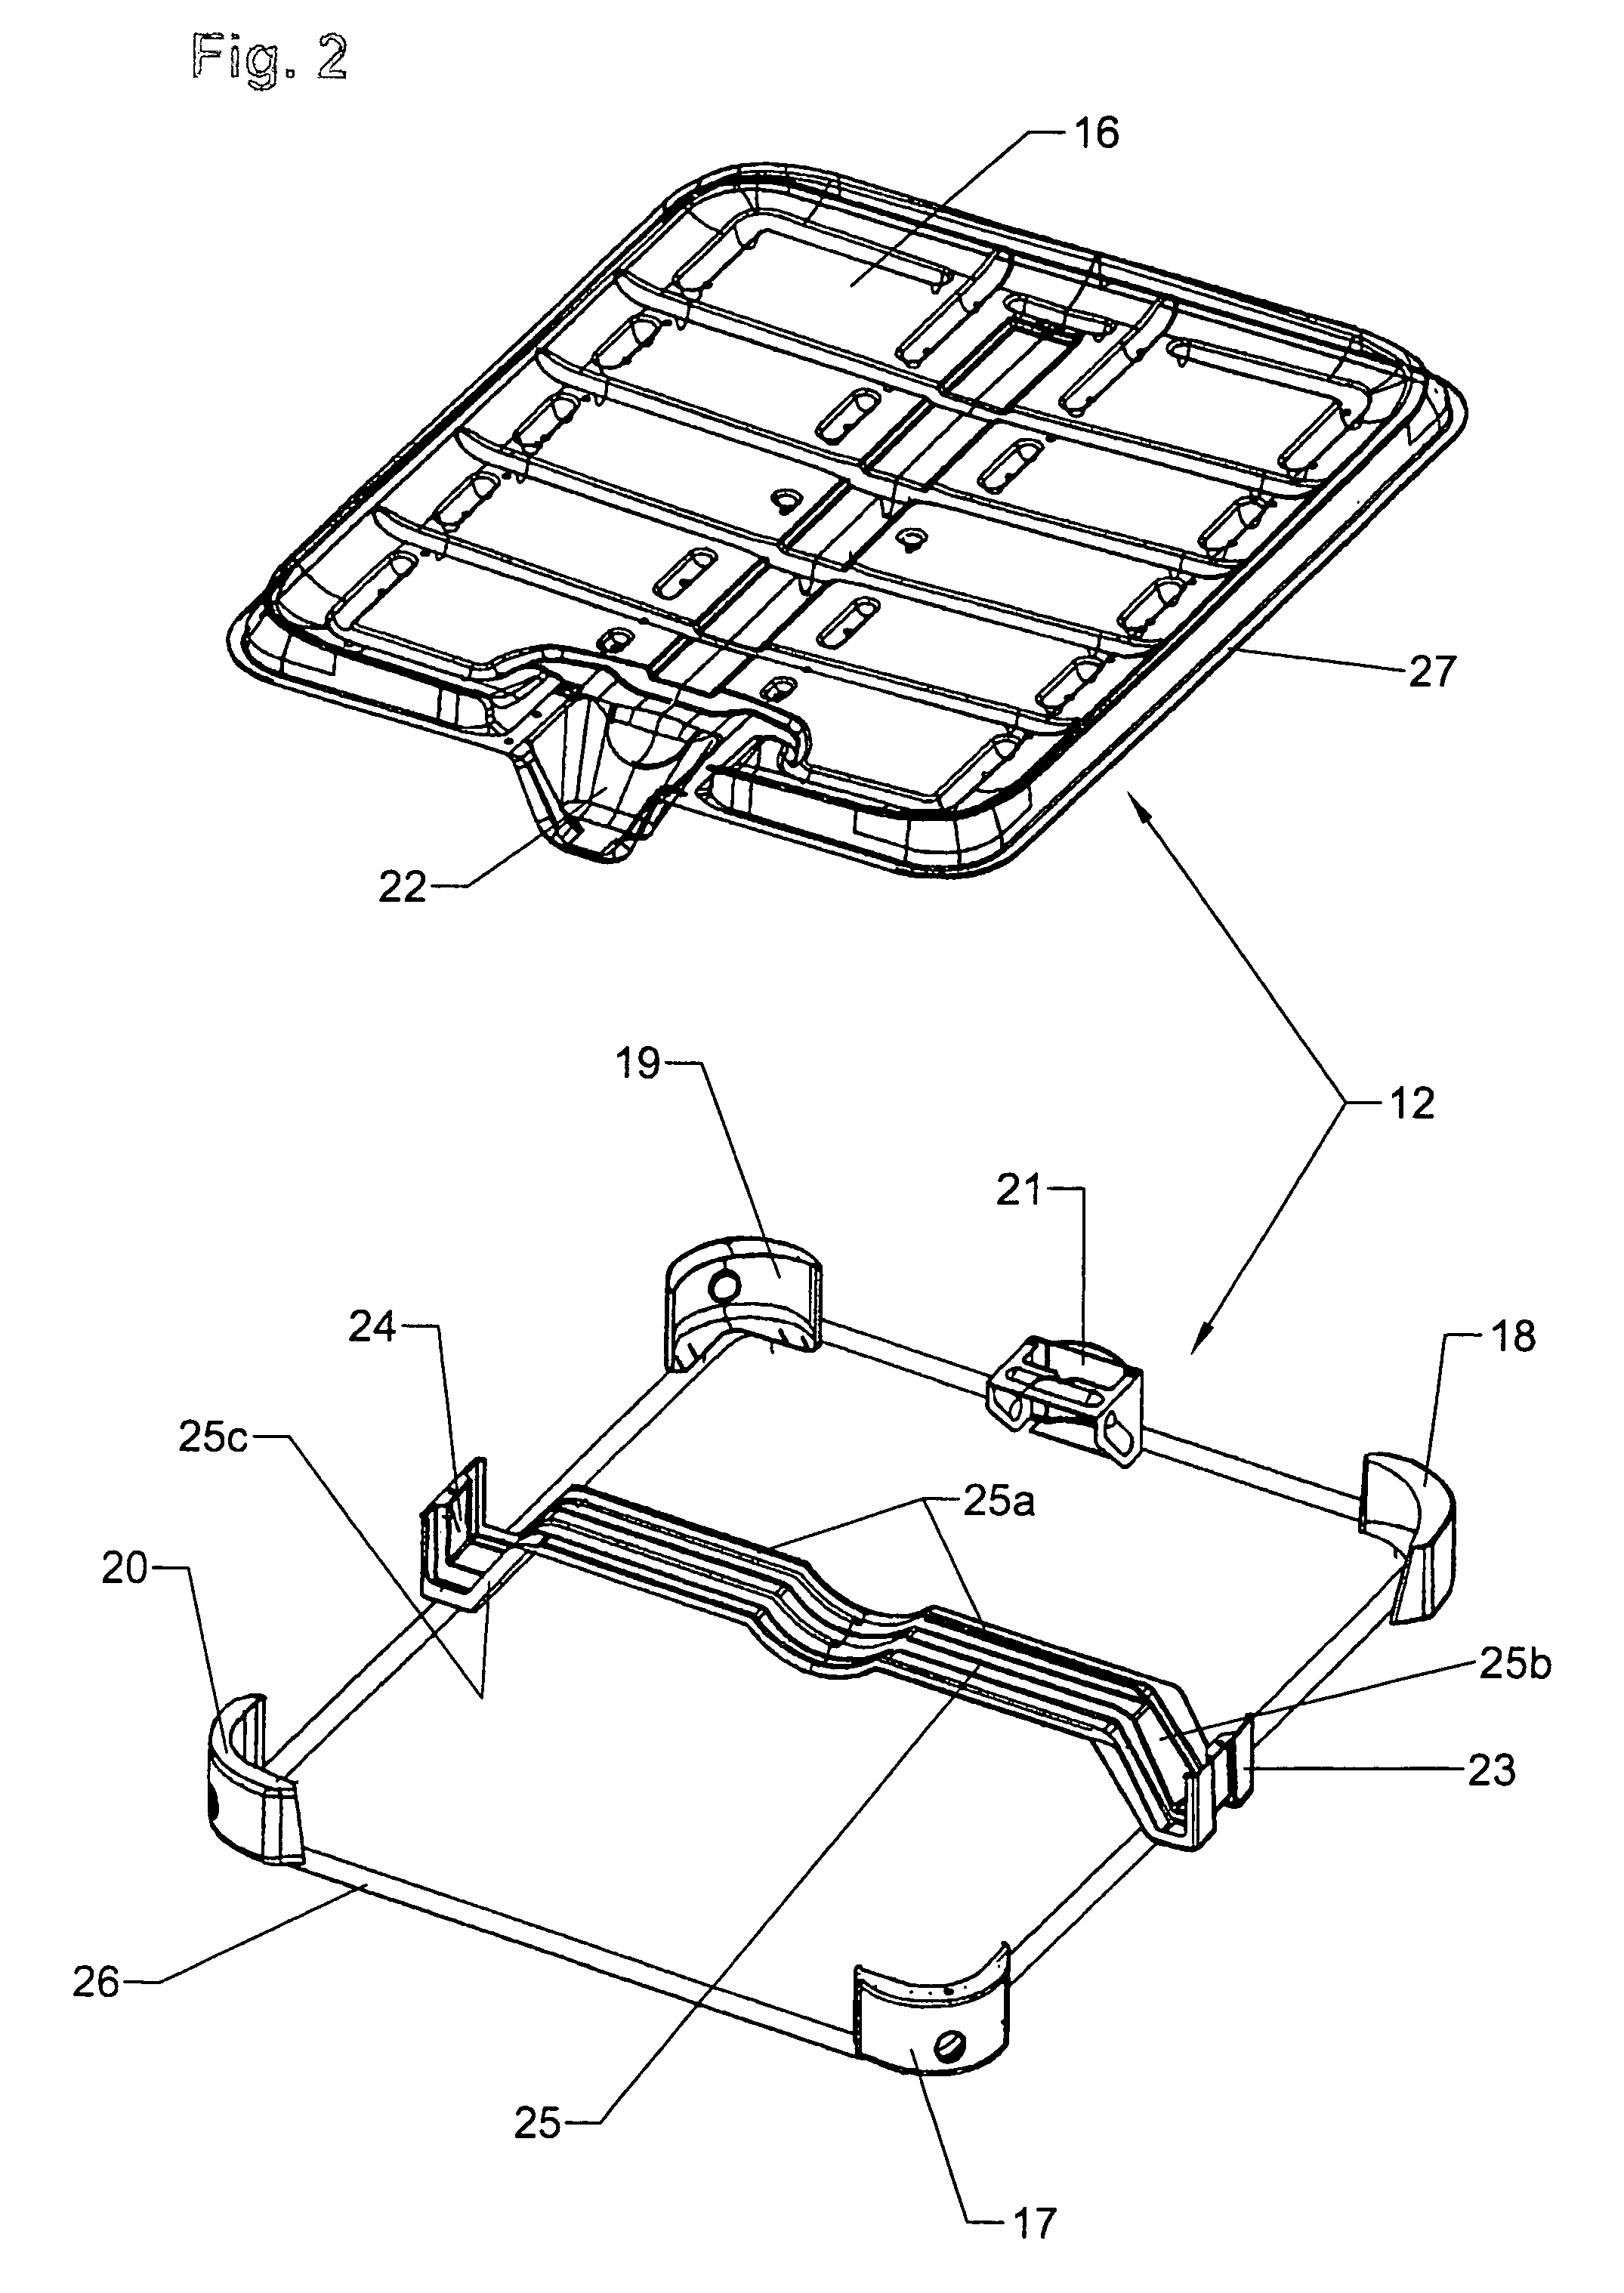 Reinforcement plate for the bottom of a pallet-like support base supported on corner and center feet and on a base frame, especially for pallet containers